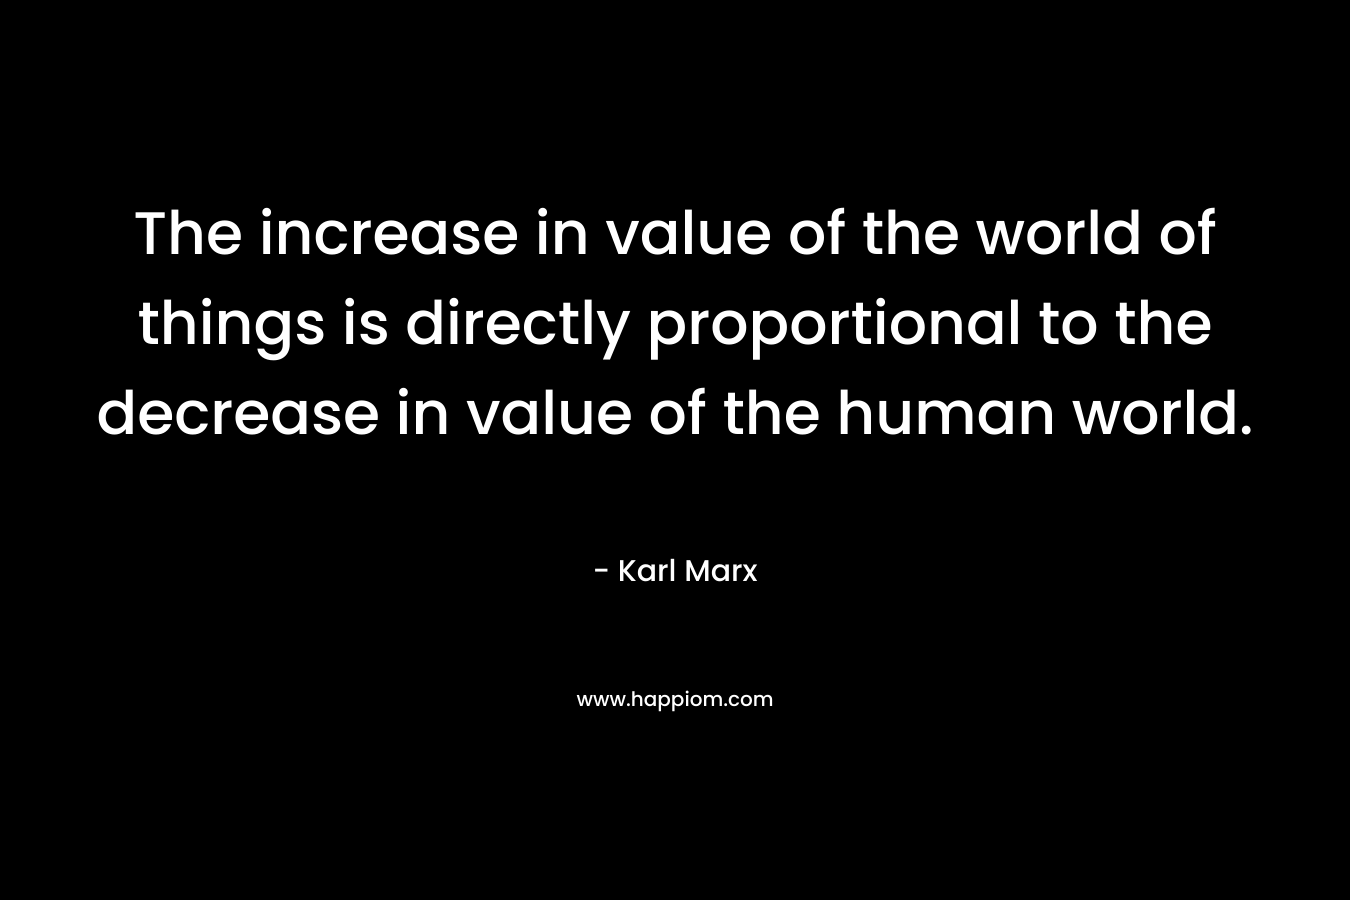 The increase in value of the world of things is directly proportional to the decrease in value of the human world. – Karl Marx